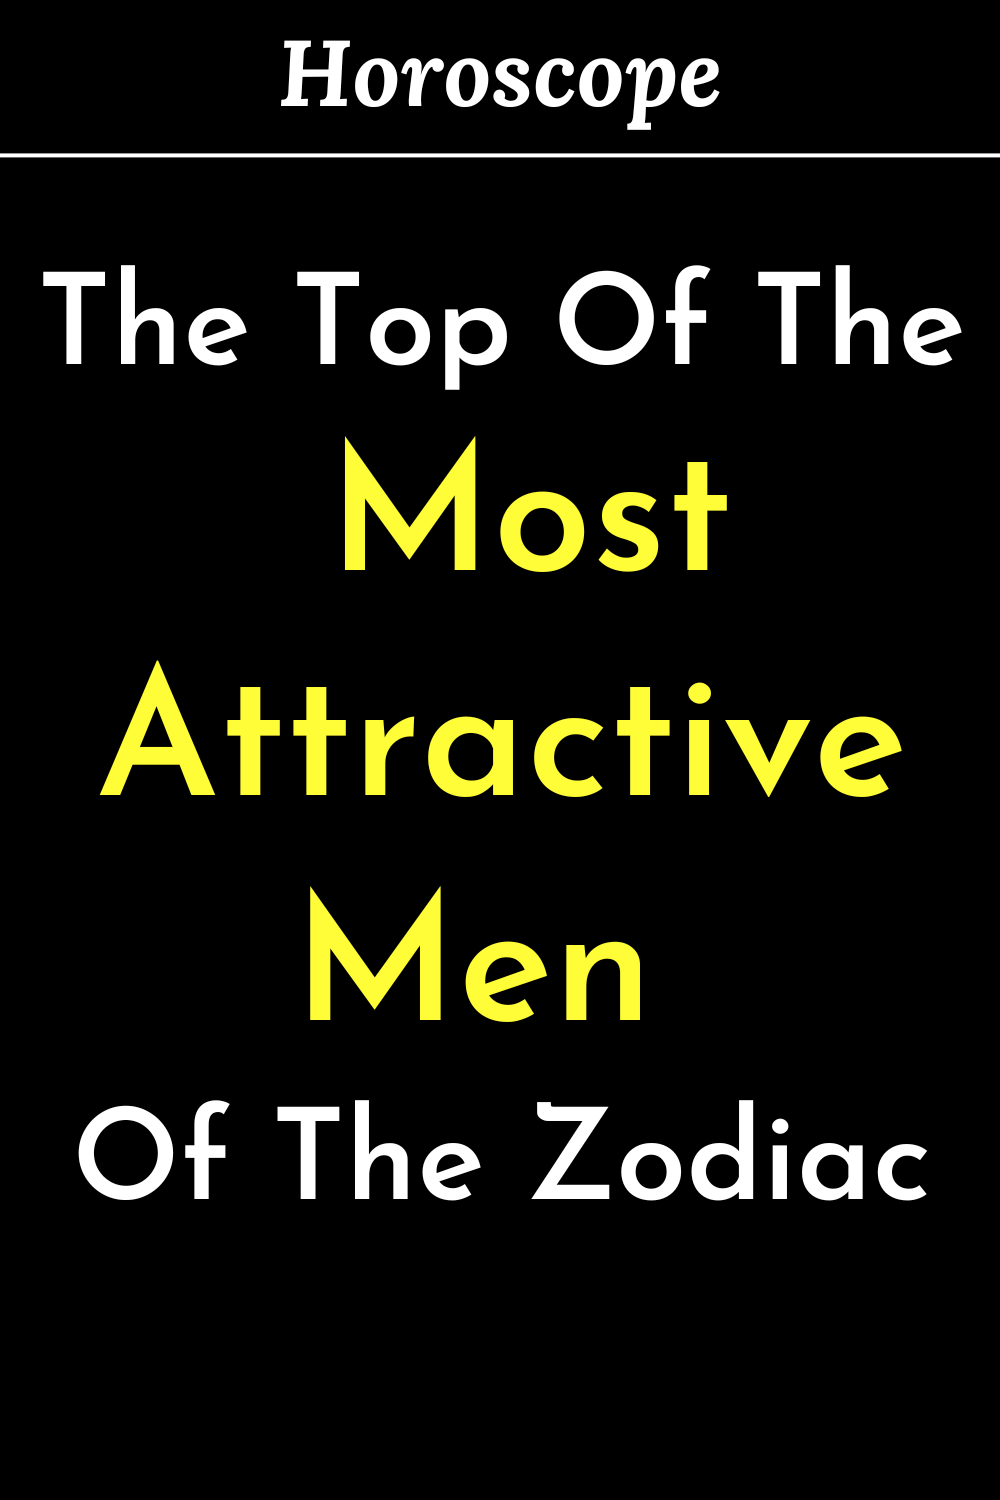 The Top Of The Most Attractive Men Of The Zodiac